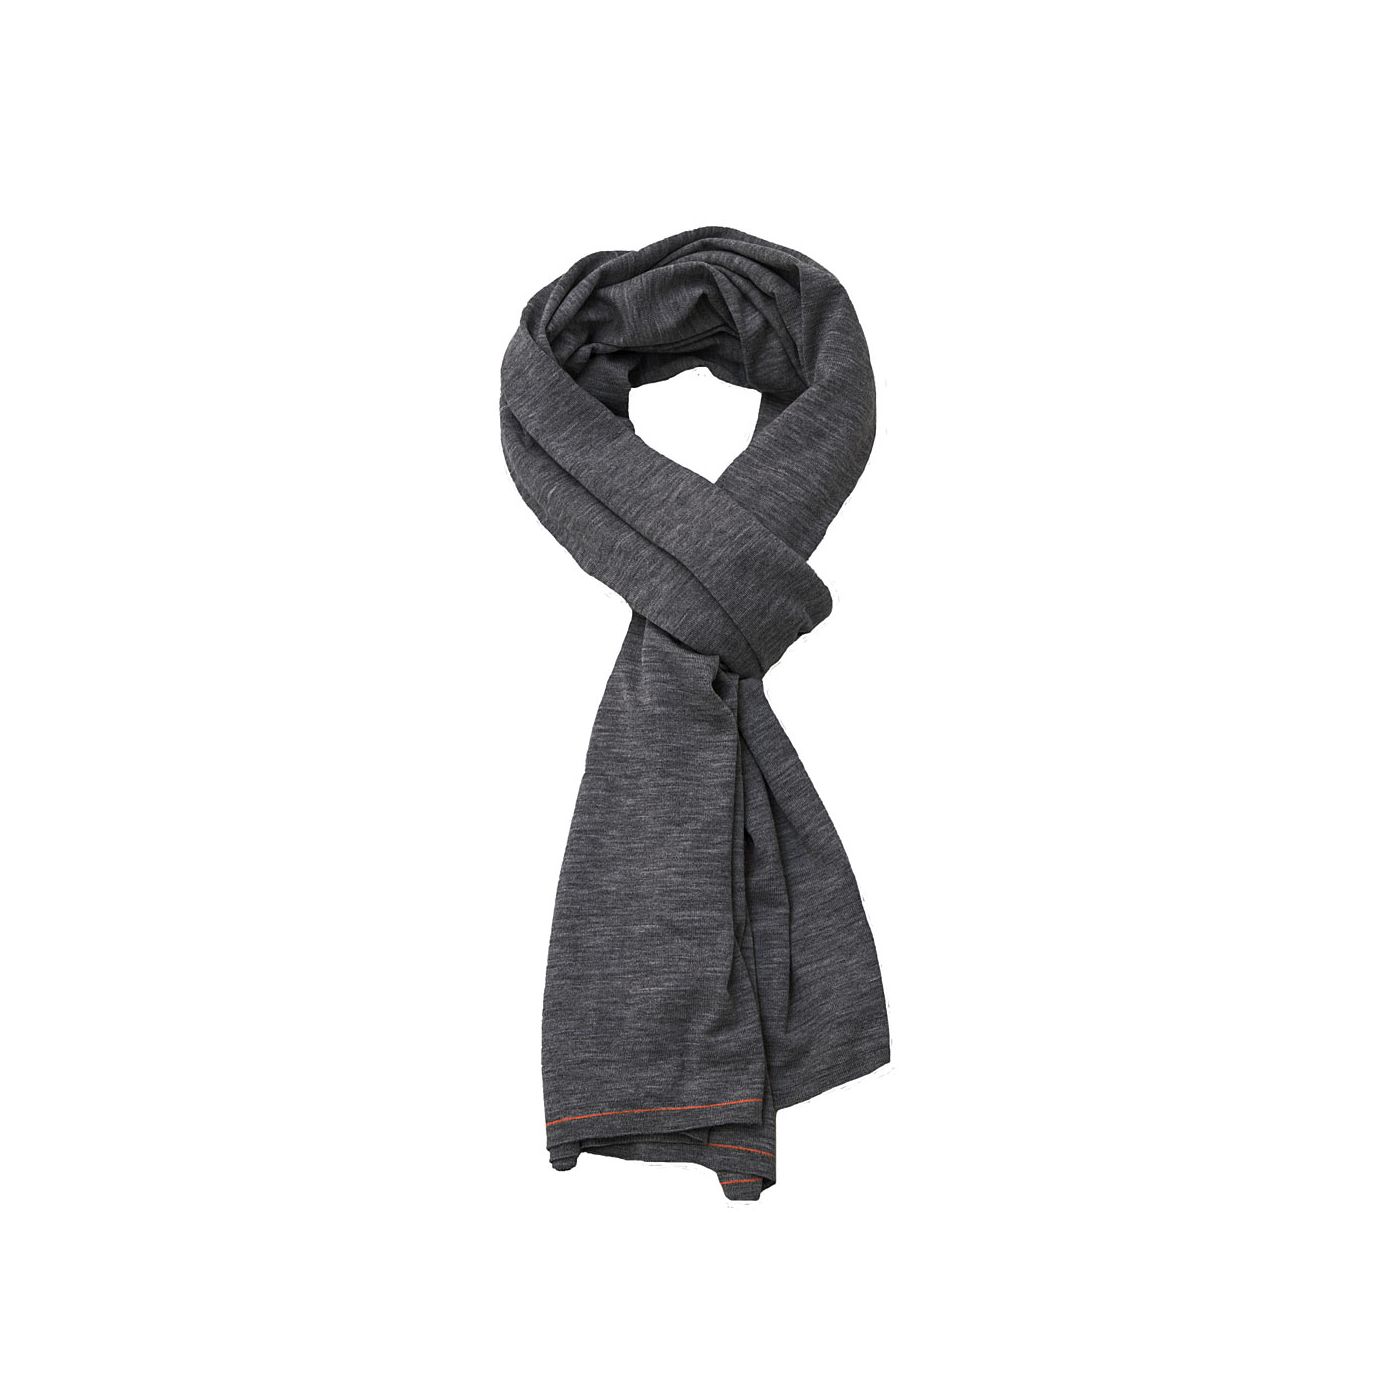 Scarf for men made of Merino wool in Grey